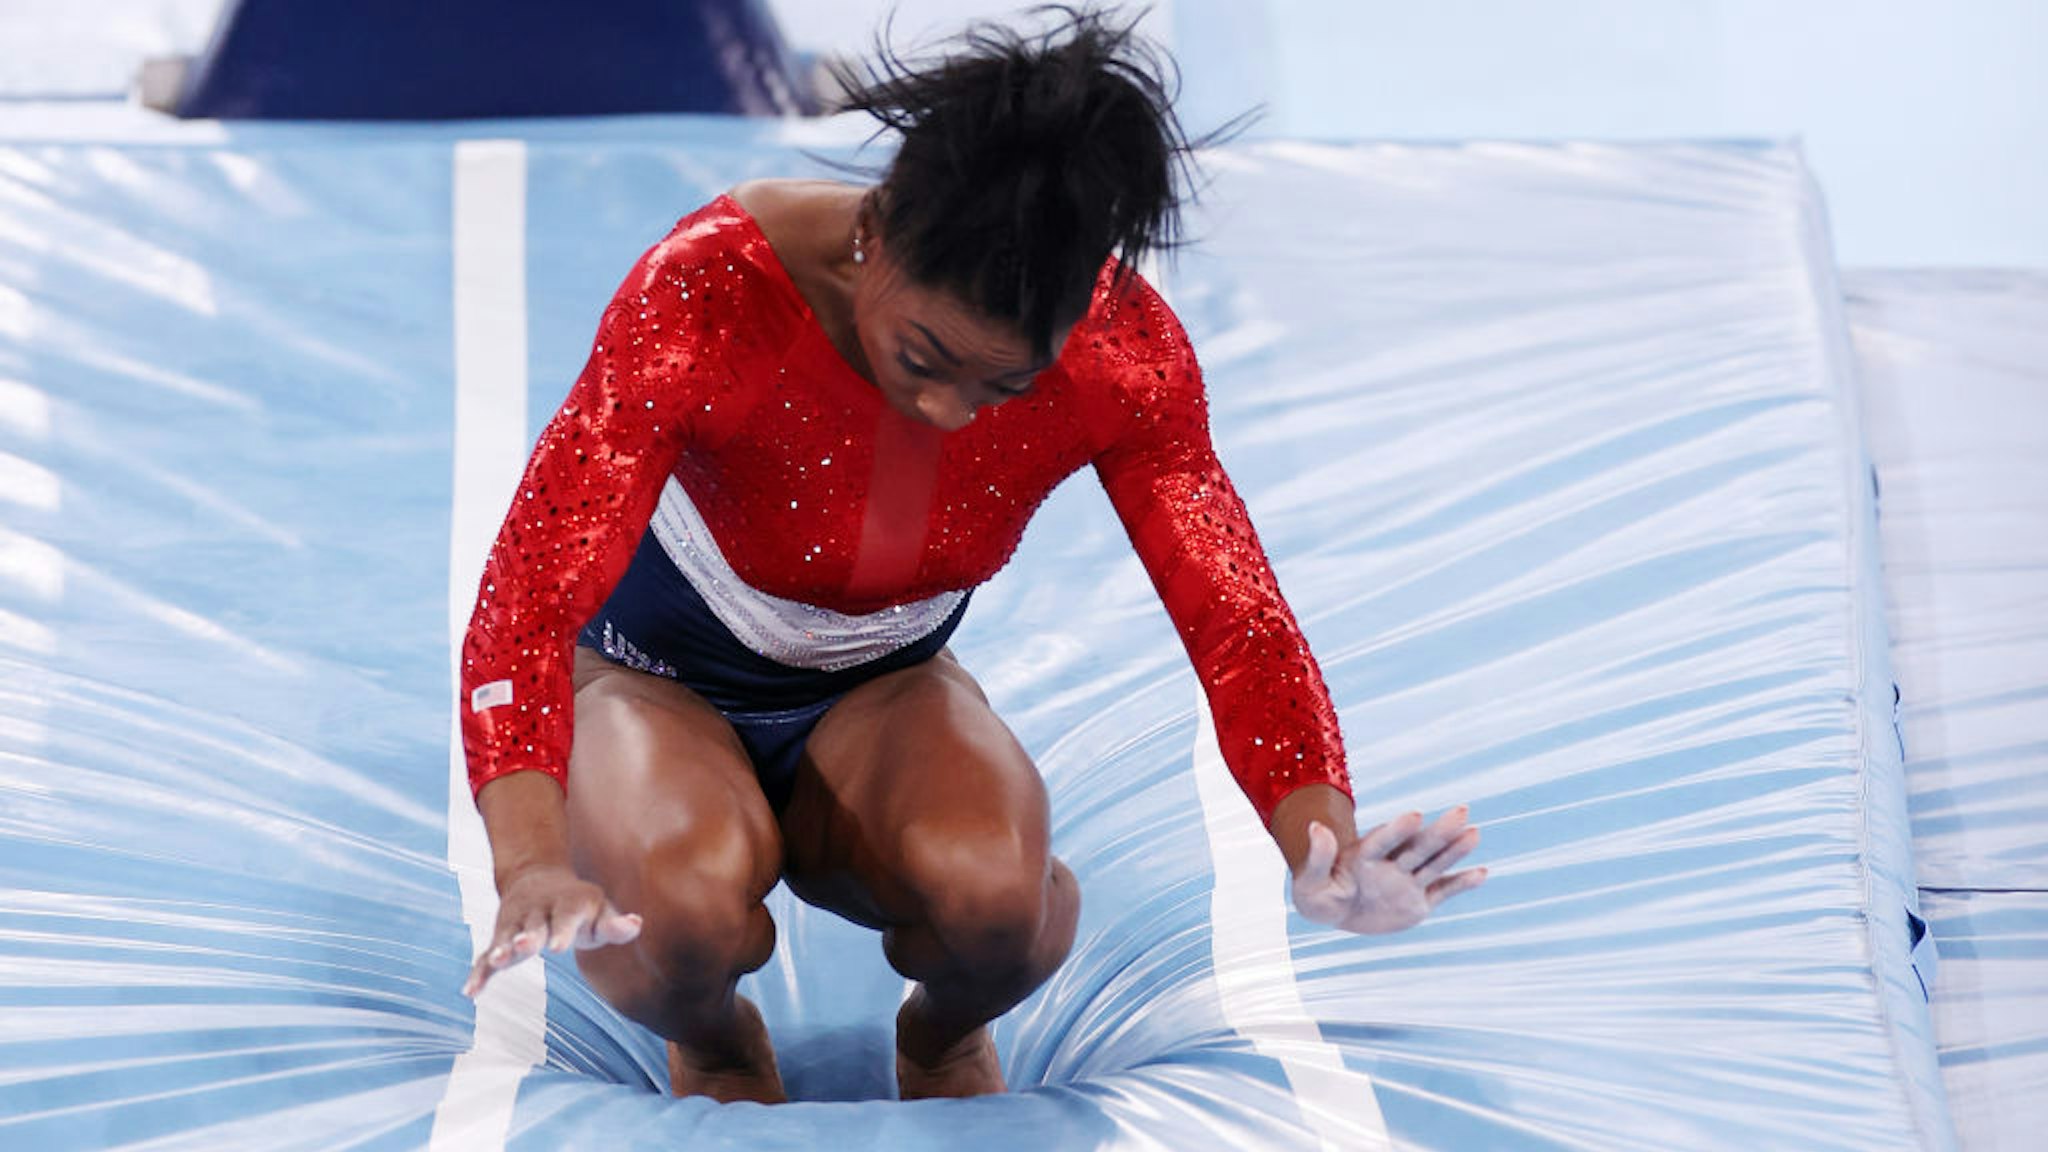 TOKYO, JAPAN - JULY 27: Simone Biles of Team United States stumbles upon landing after competing in vault during the Women's Team Final on day four of the Tokyo 2020 Olympic Games at Ariake Gymnastics Centre on July 27, 2021 in Tokyo, Japan. (Photo by Jamie Squire/Getty Images)